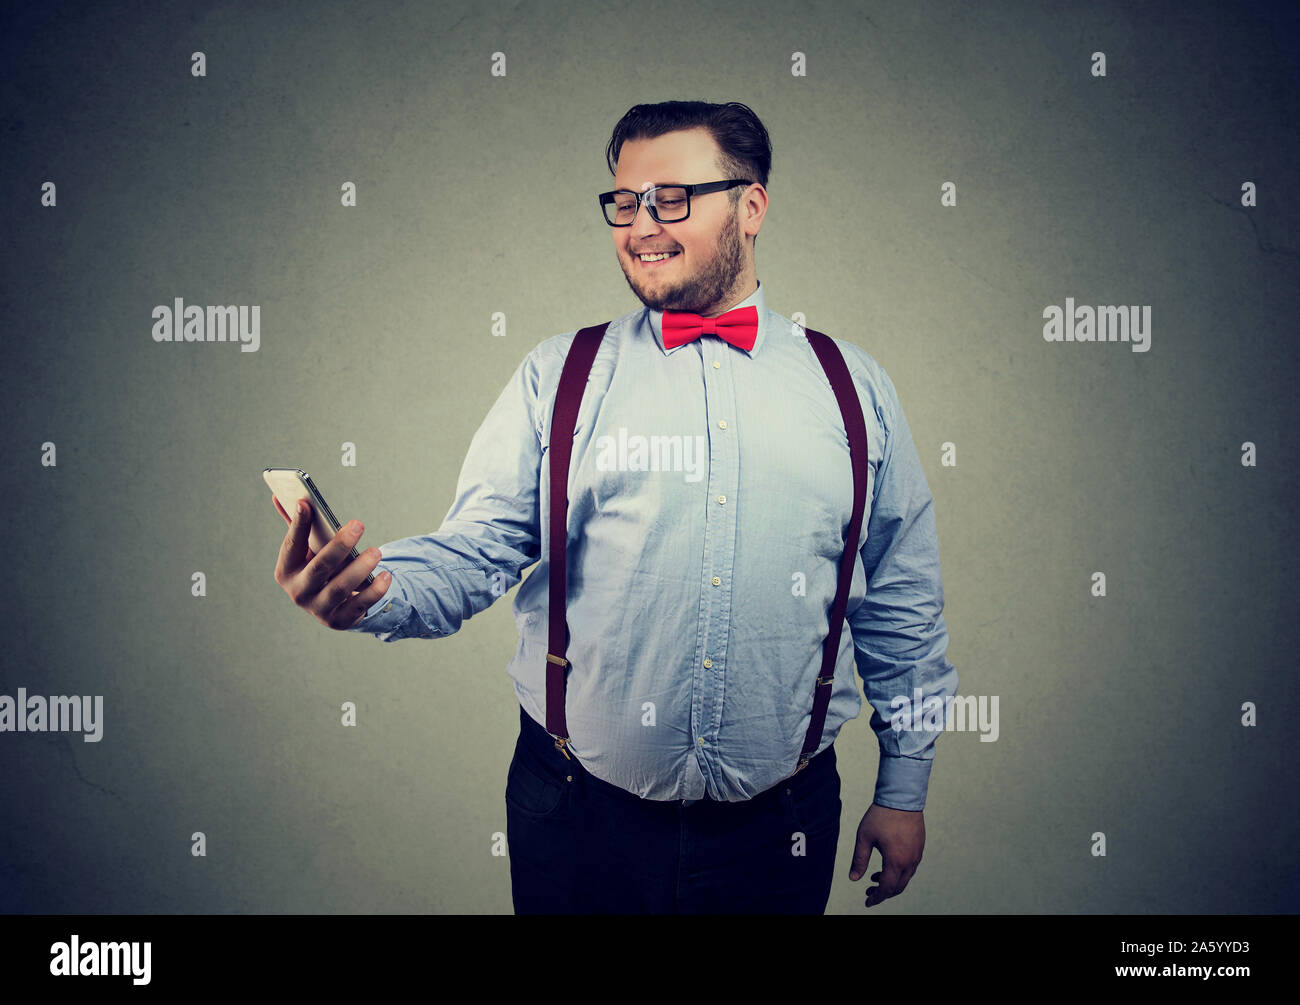 Funny chubby guy taking selfie with cellphone Stock Photo